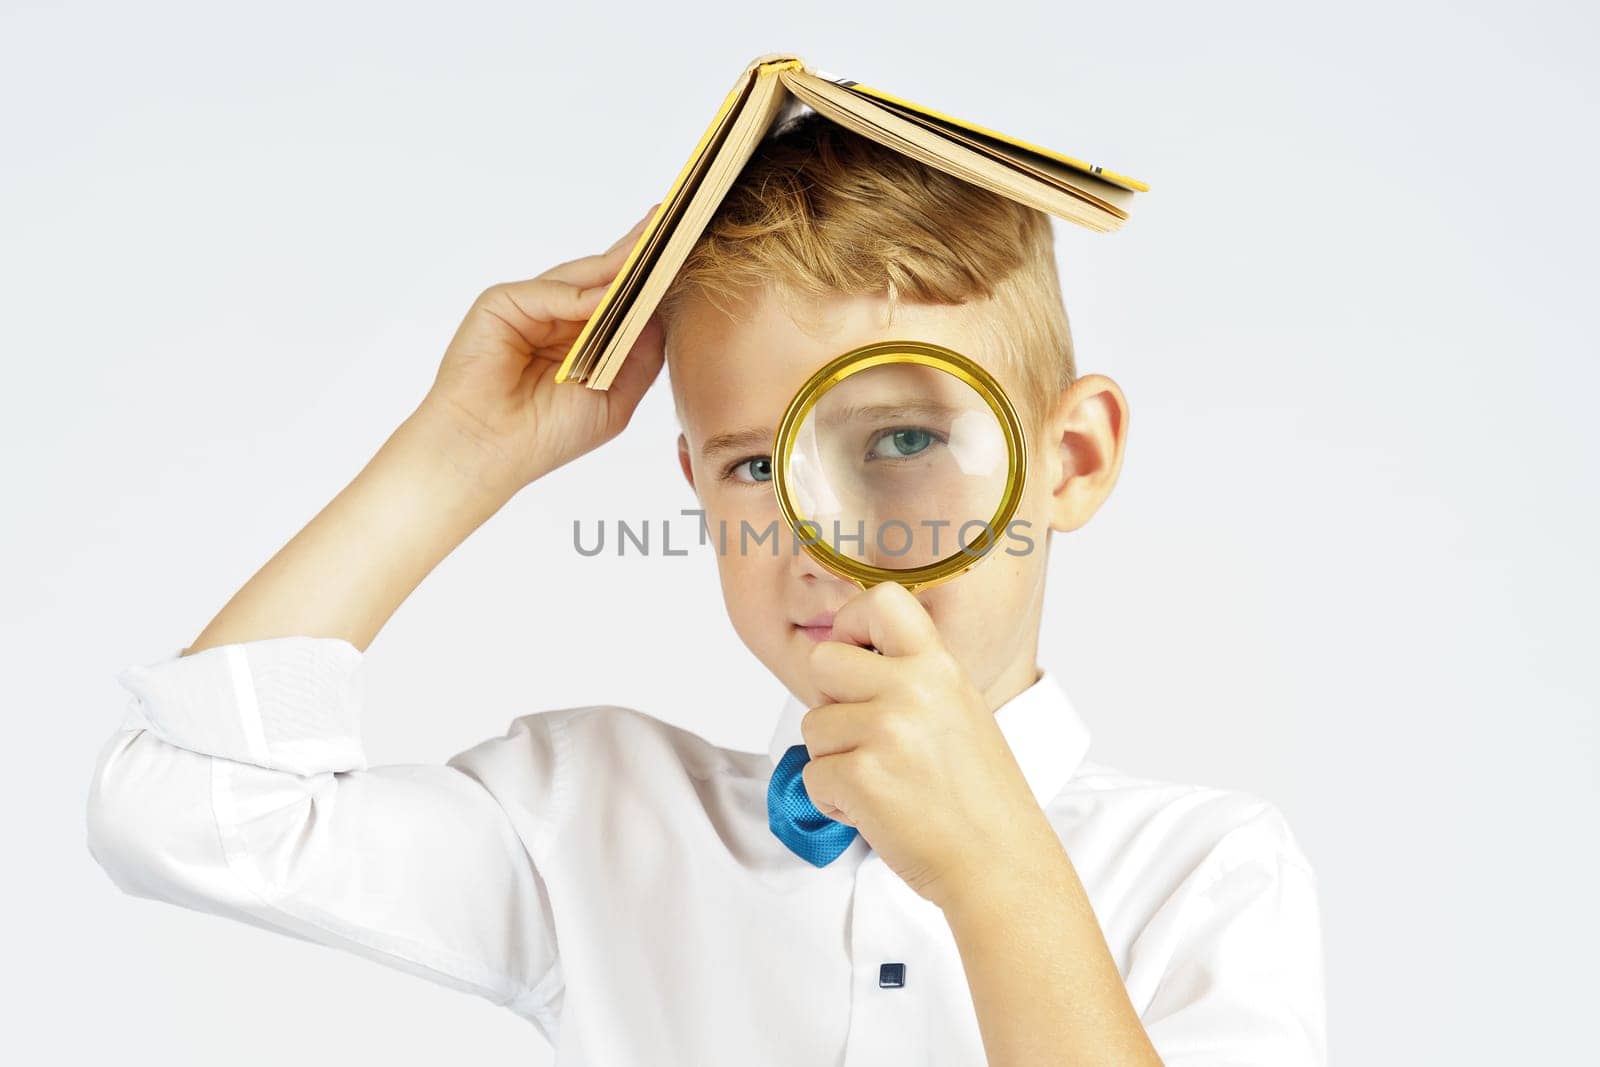 The schoolboy put the book on his head and looks through a magnifying glass. Isolated background. Education concept